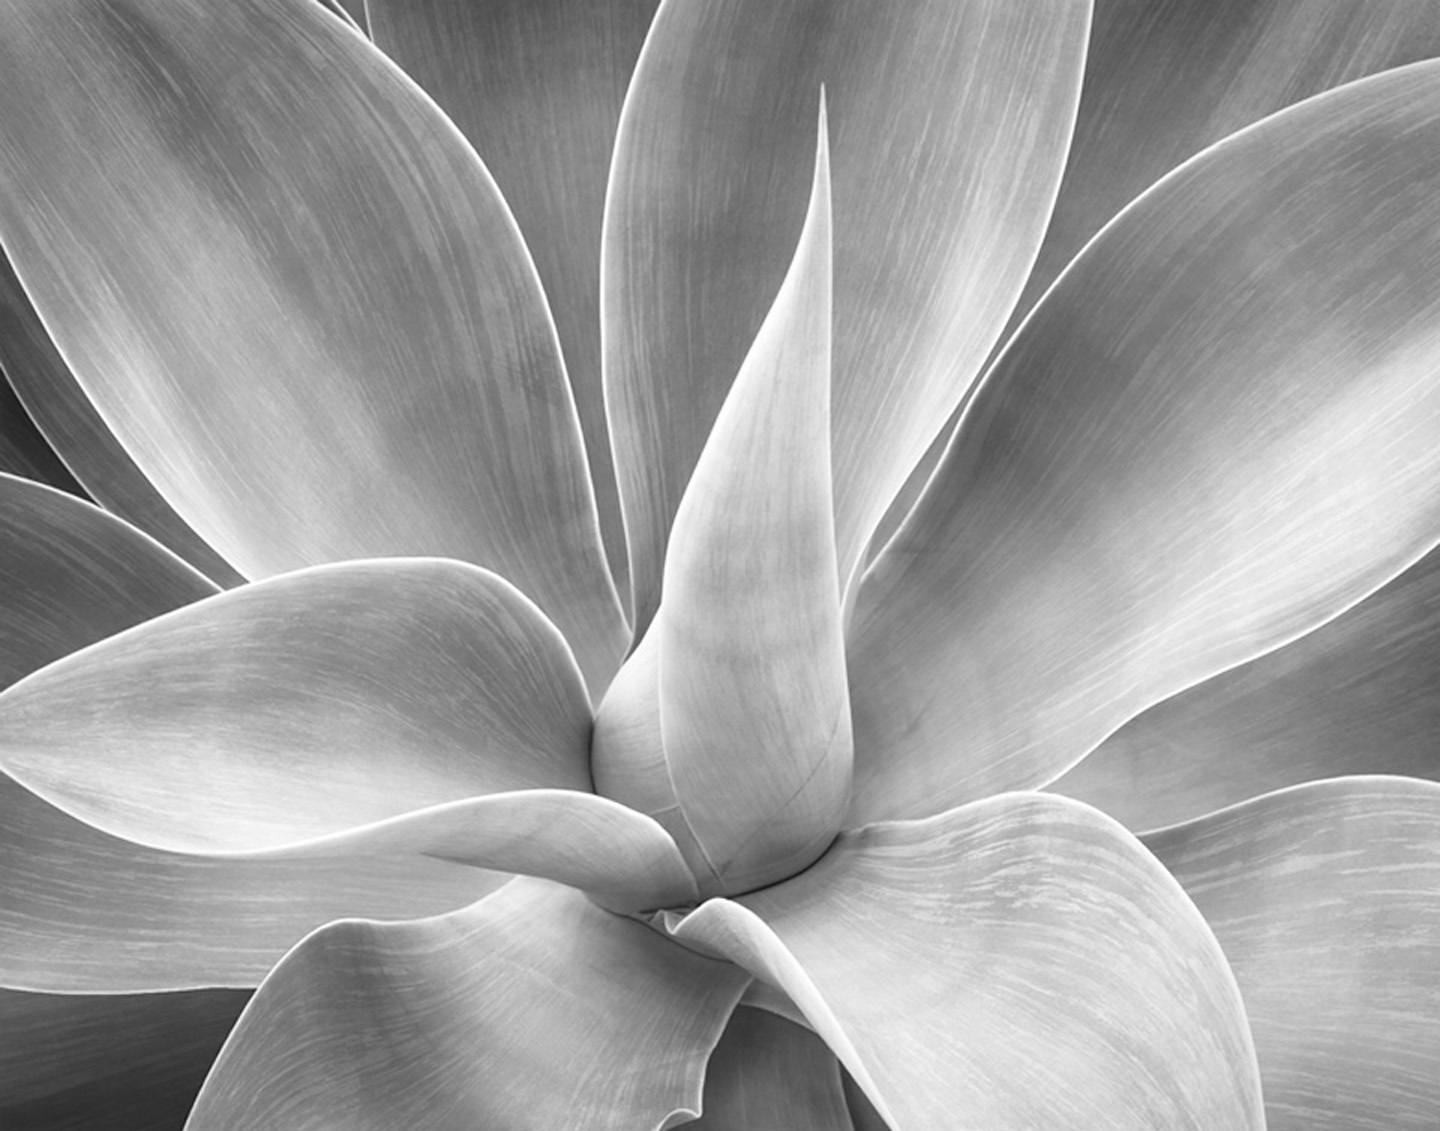 Black and white close-up photo of an agave plant